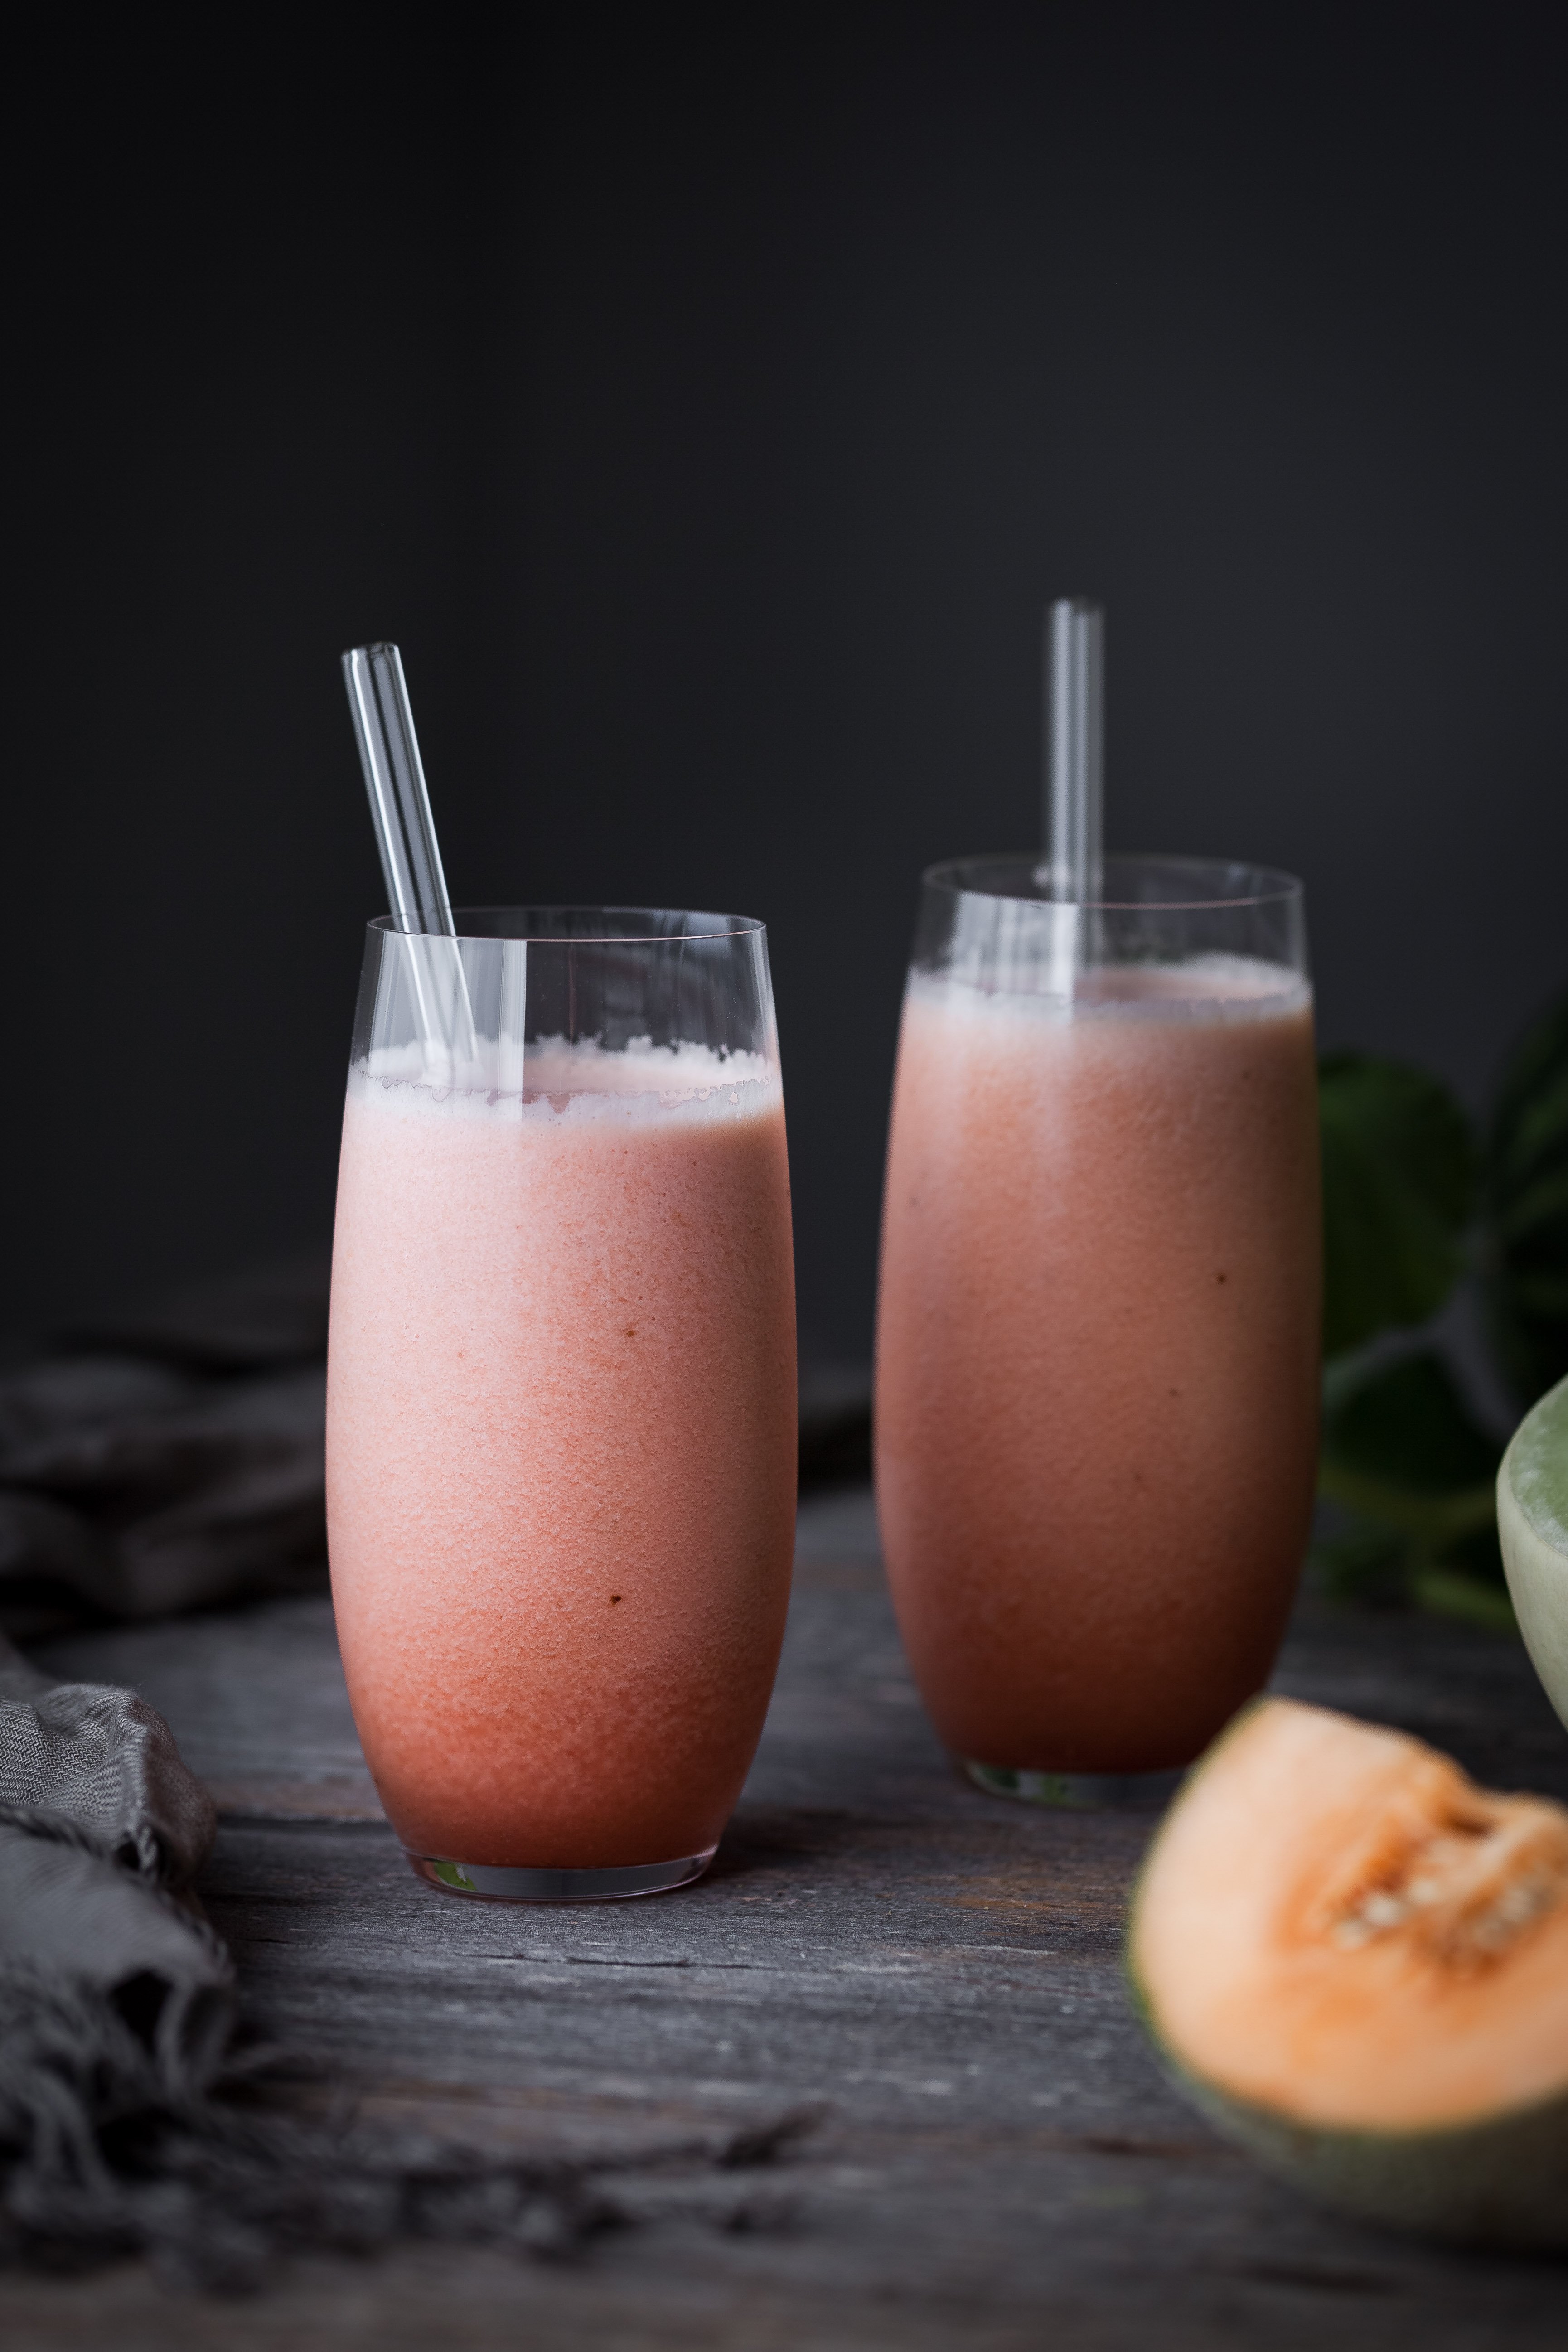 portrait view of two melon smoothies with straws on a wood table.